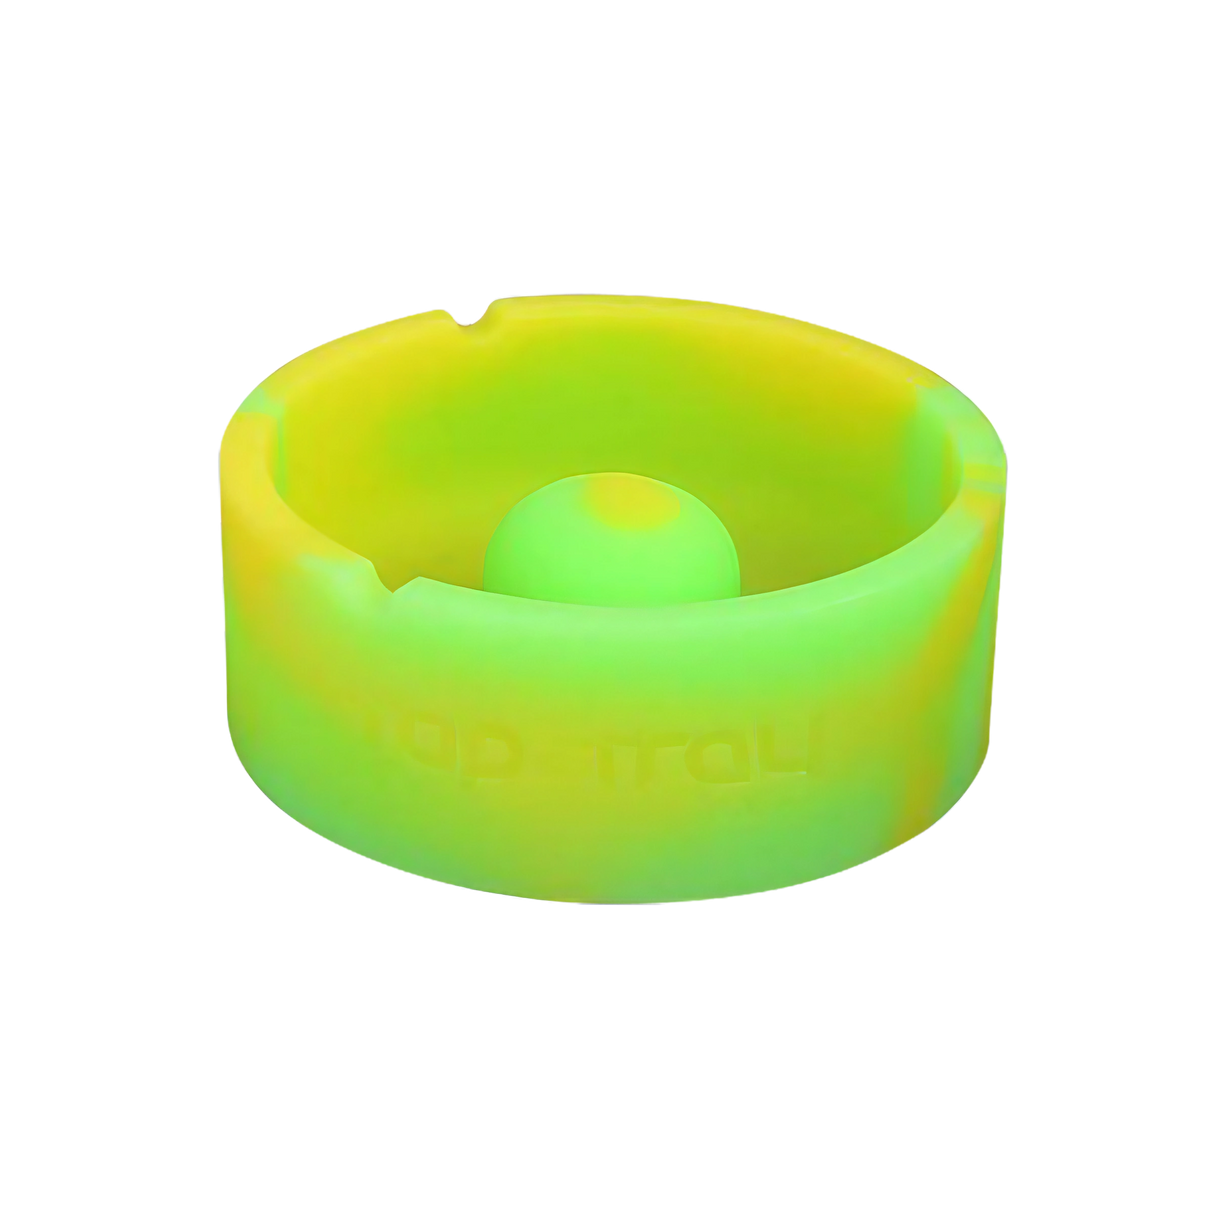 Pulsar Basic Tap Tray Ashtray in Silicone, Glowing Green, 4" Size - Top View